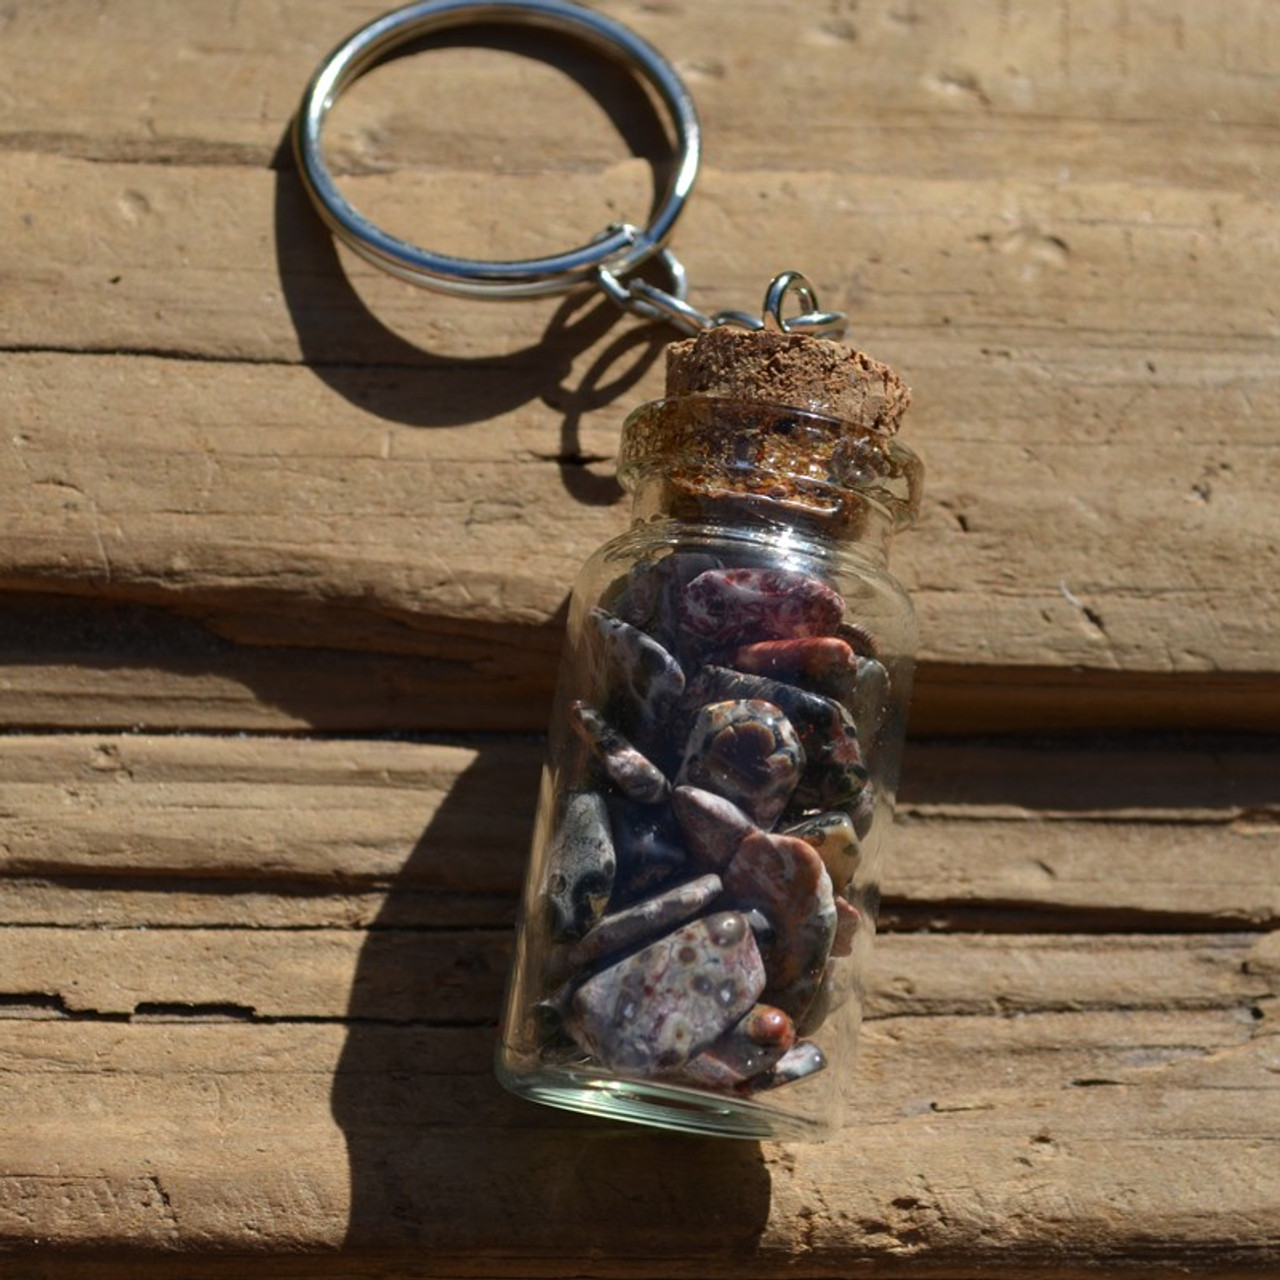 Leopard Skin Jasper Stones in a Glass Vial Keychain - Made to Order